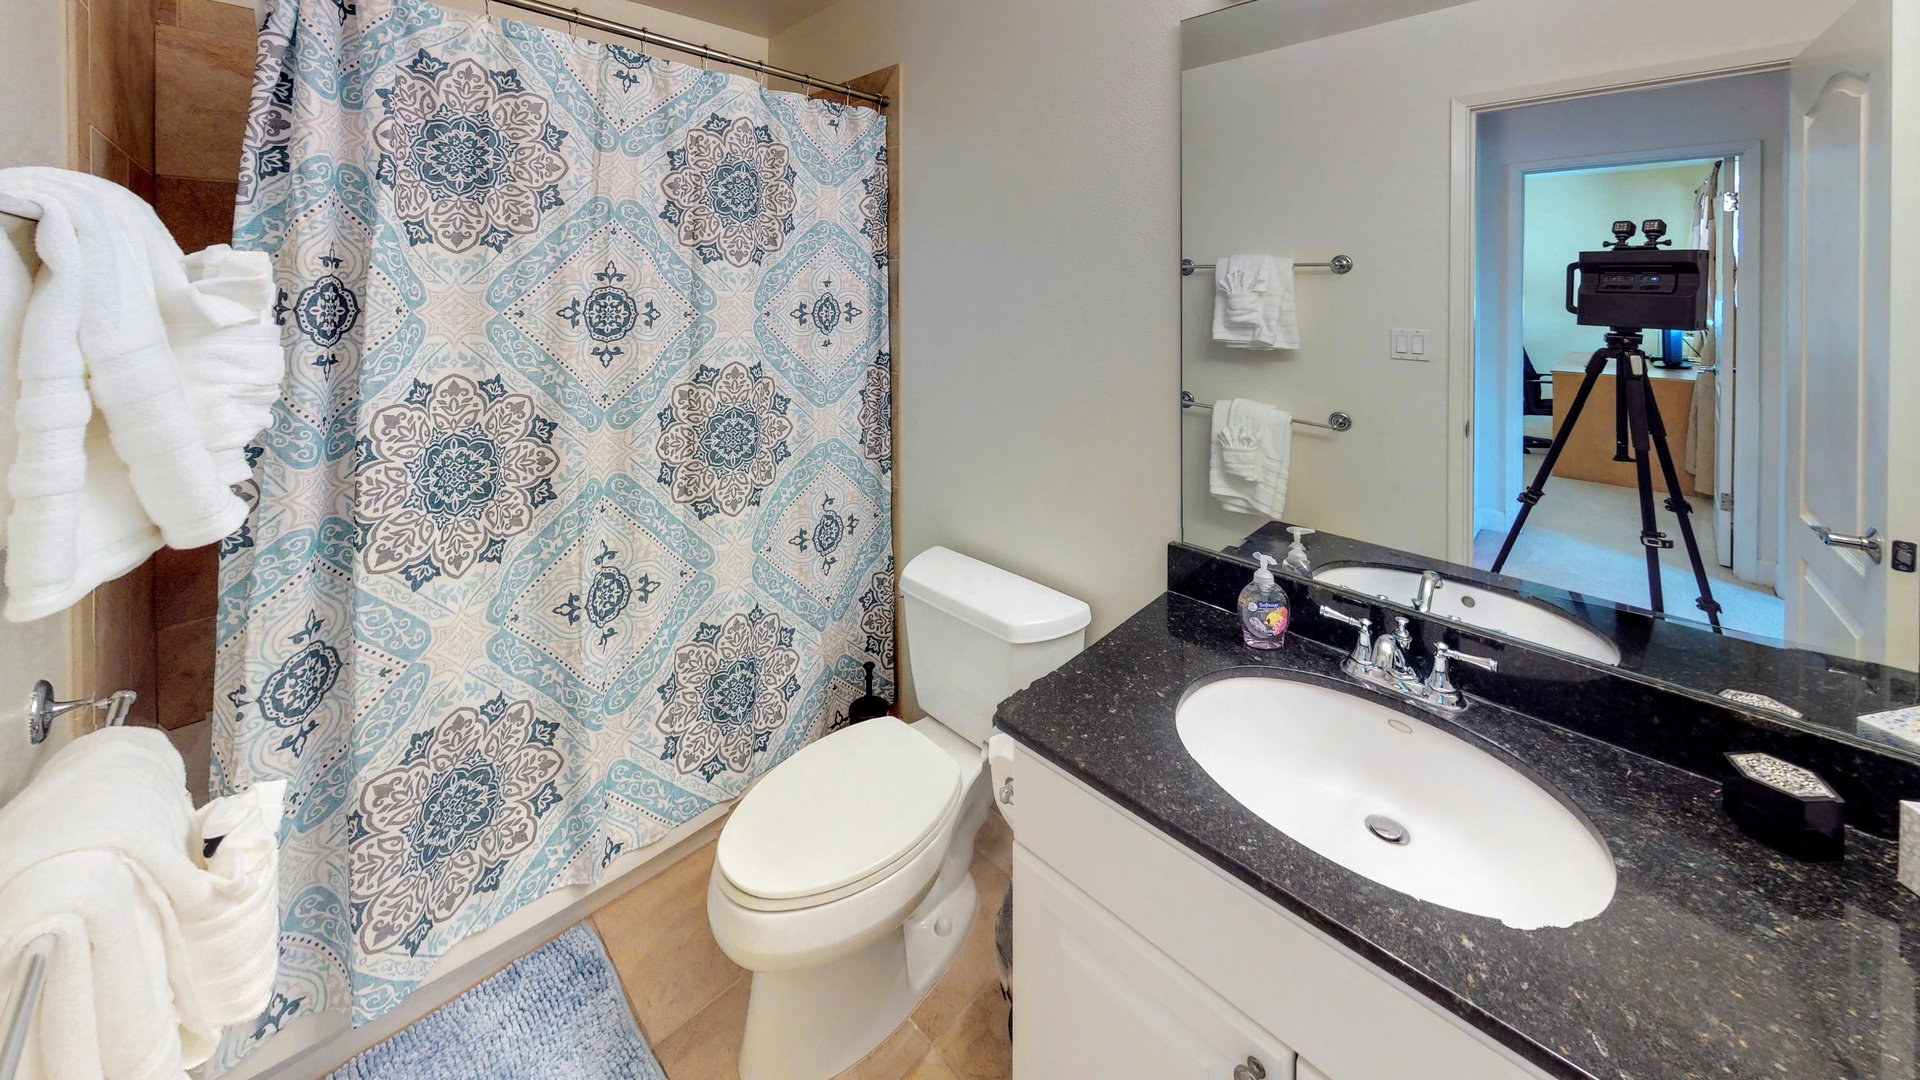 Kapolei Vacation Rentals, Ko Olina Kai 1029B - The second guest bathroom with a shower and colorful designs.